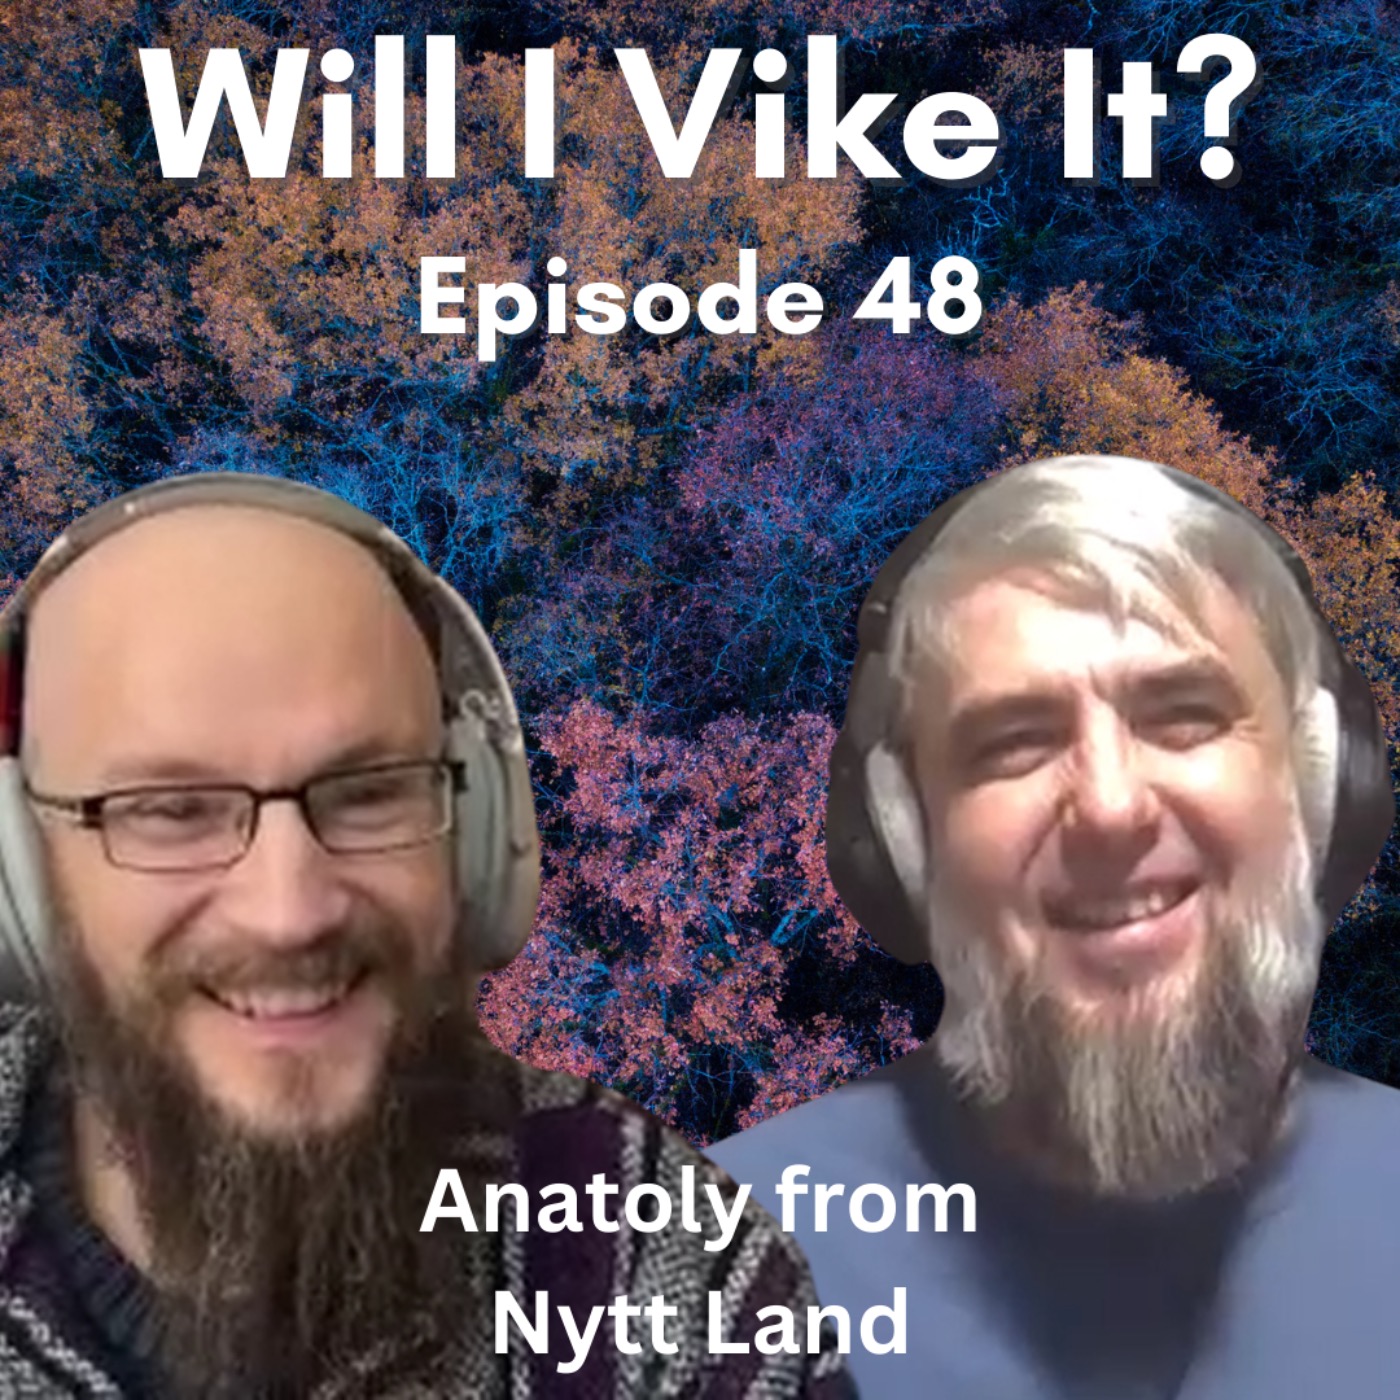 Anatoly from NYTT LAND